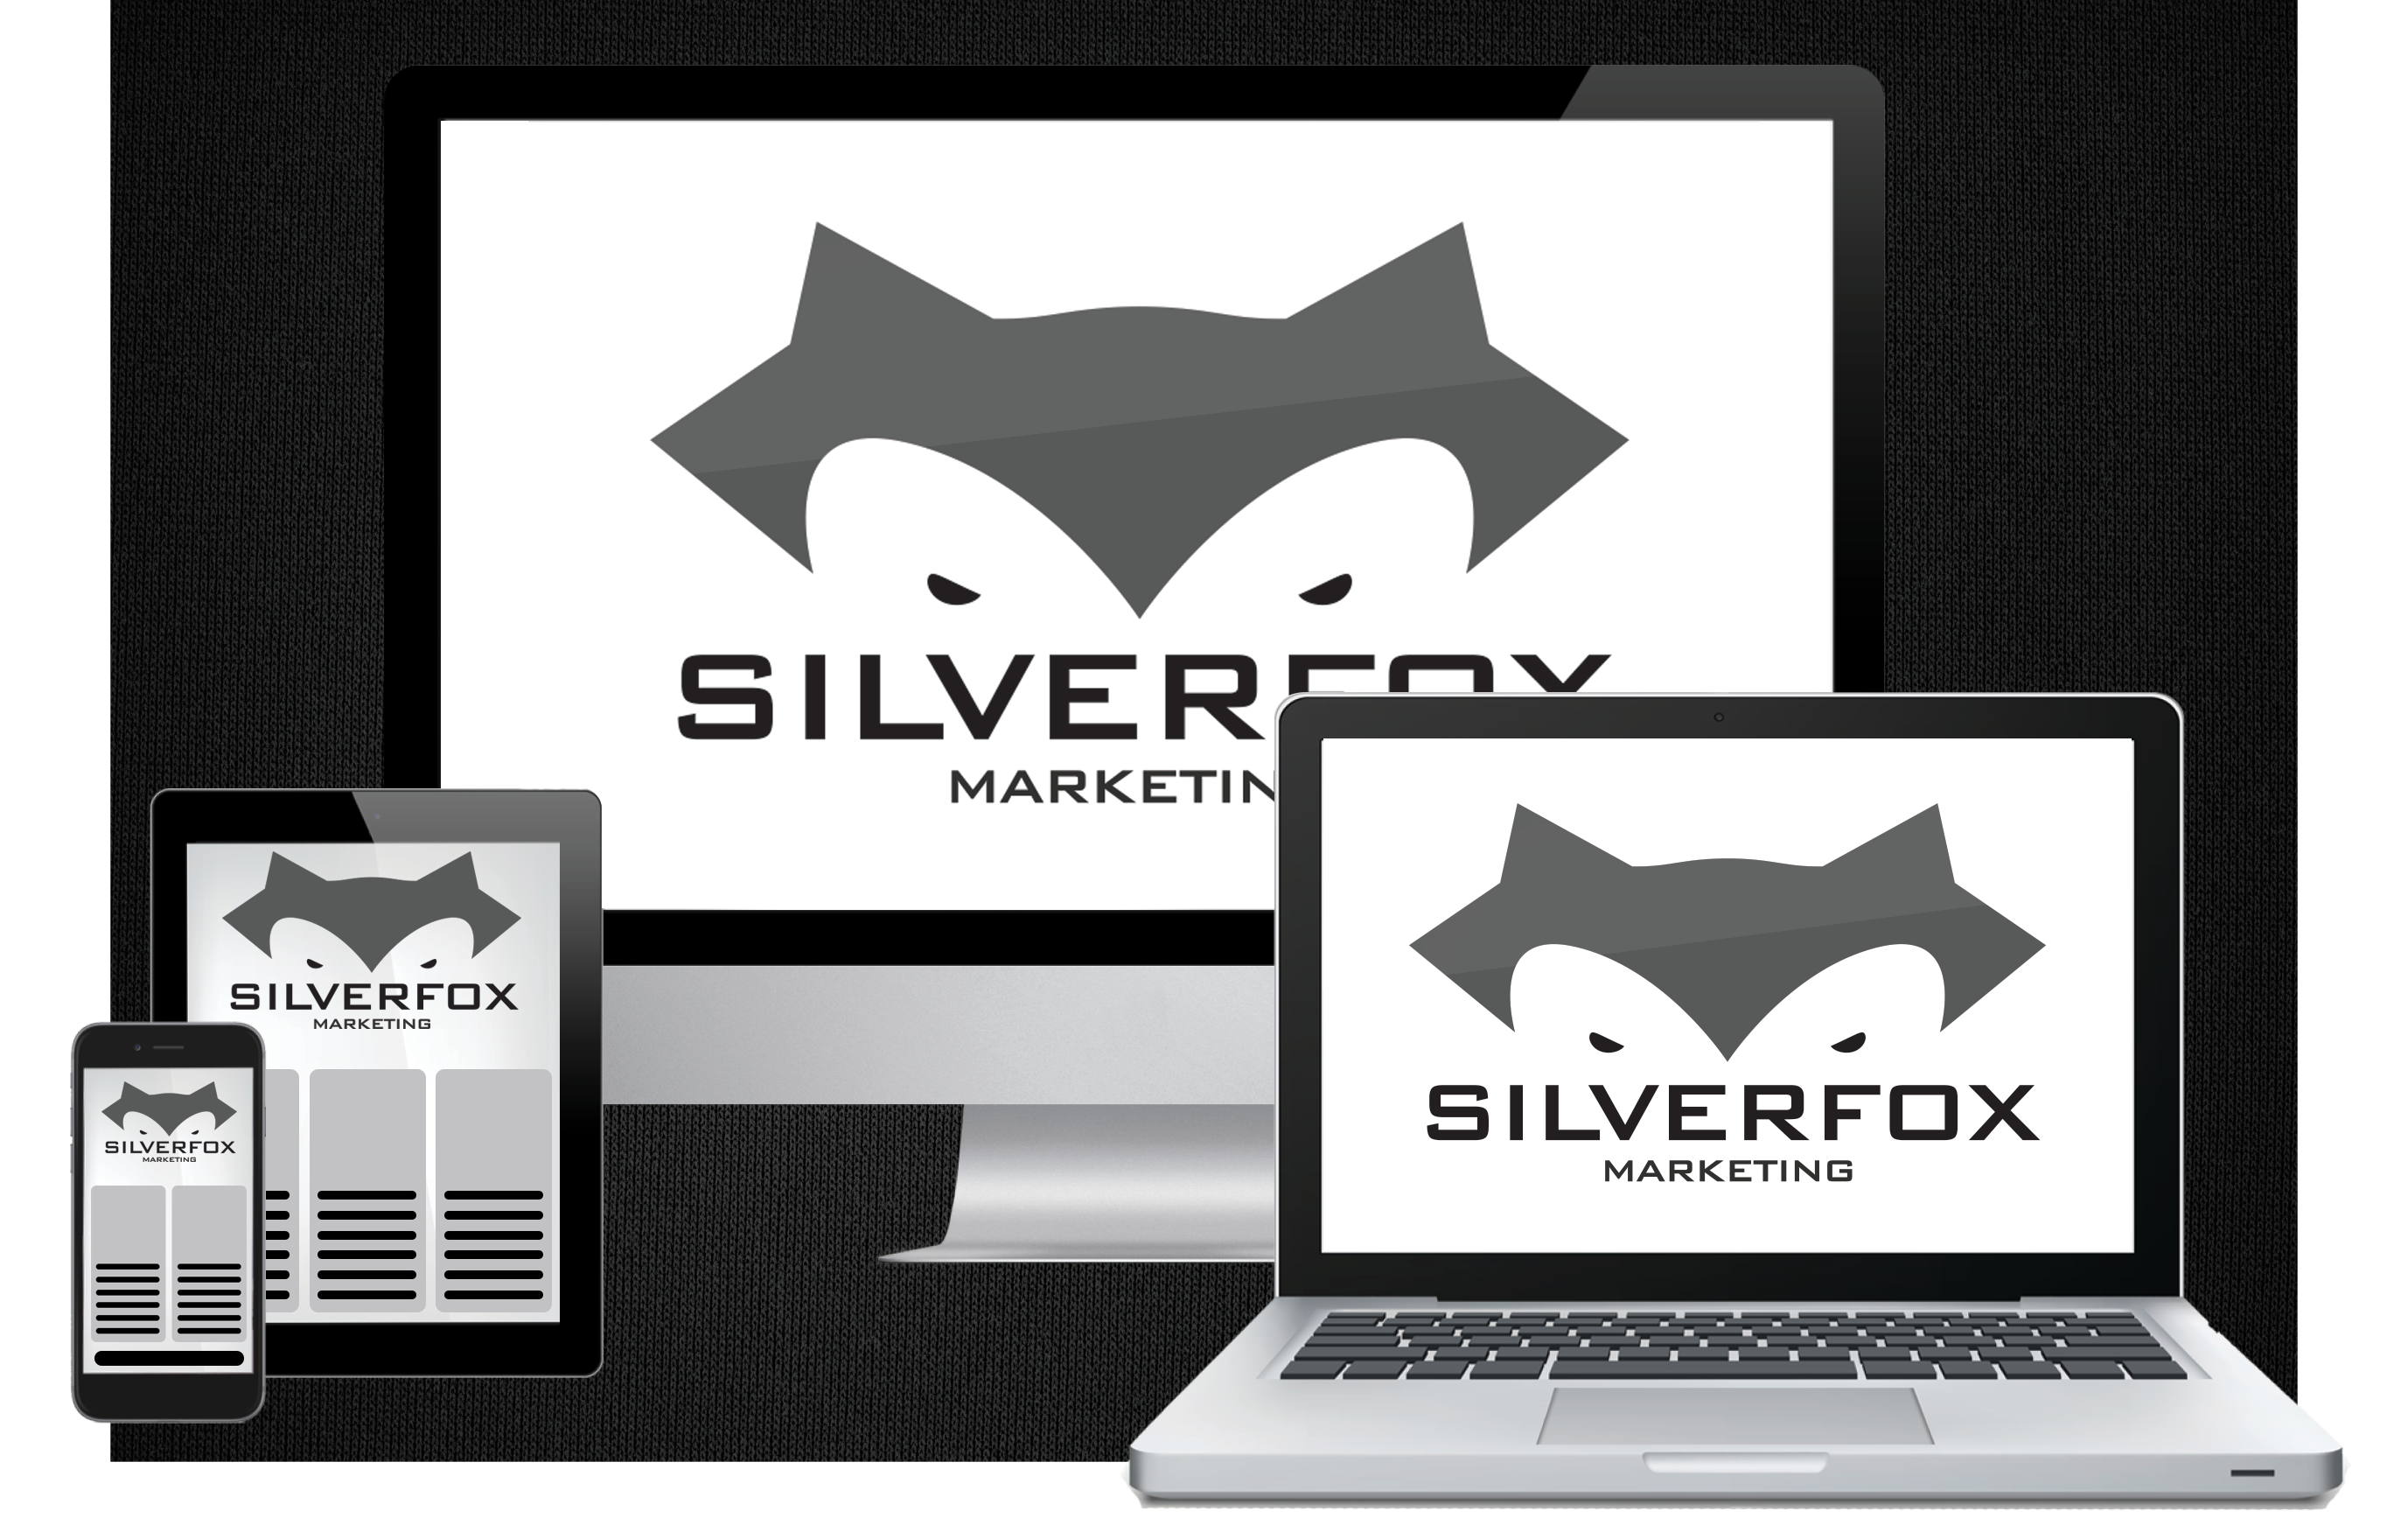 Cross Platform Marketing Elevate your brand and create unmistakable consistency between web and social media assets with Cross Platform Marketing Plans from SilverFox.